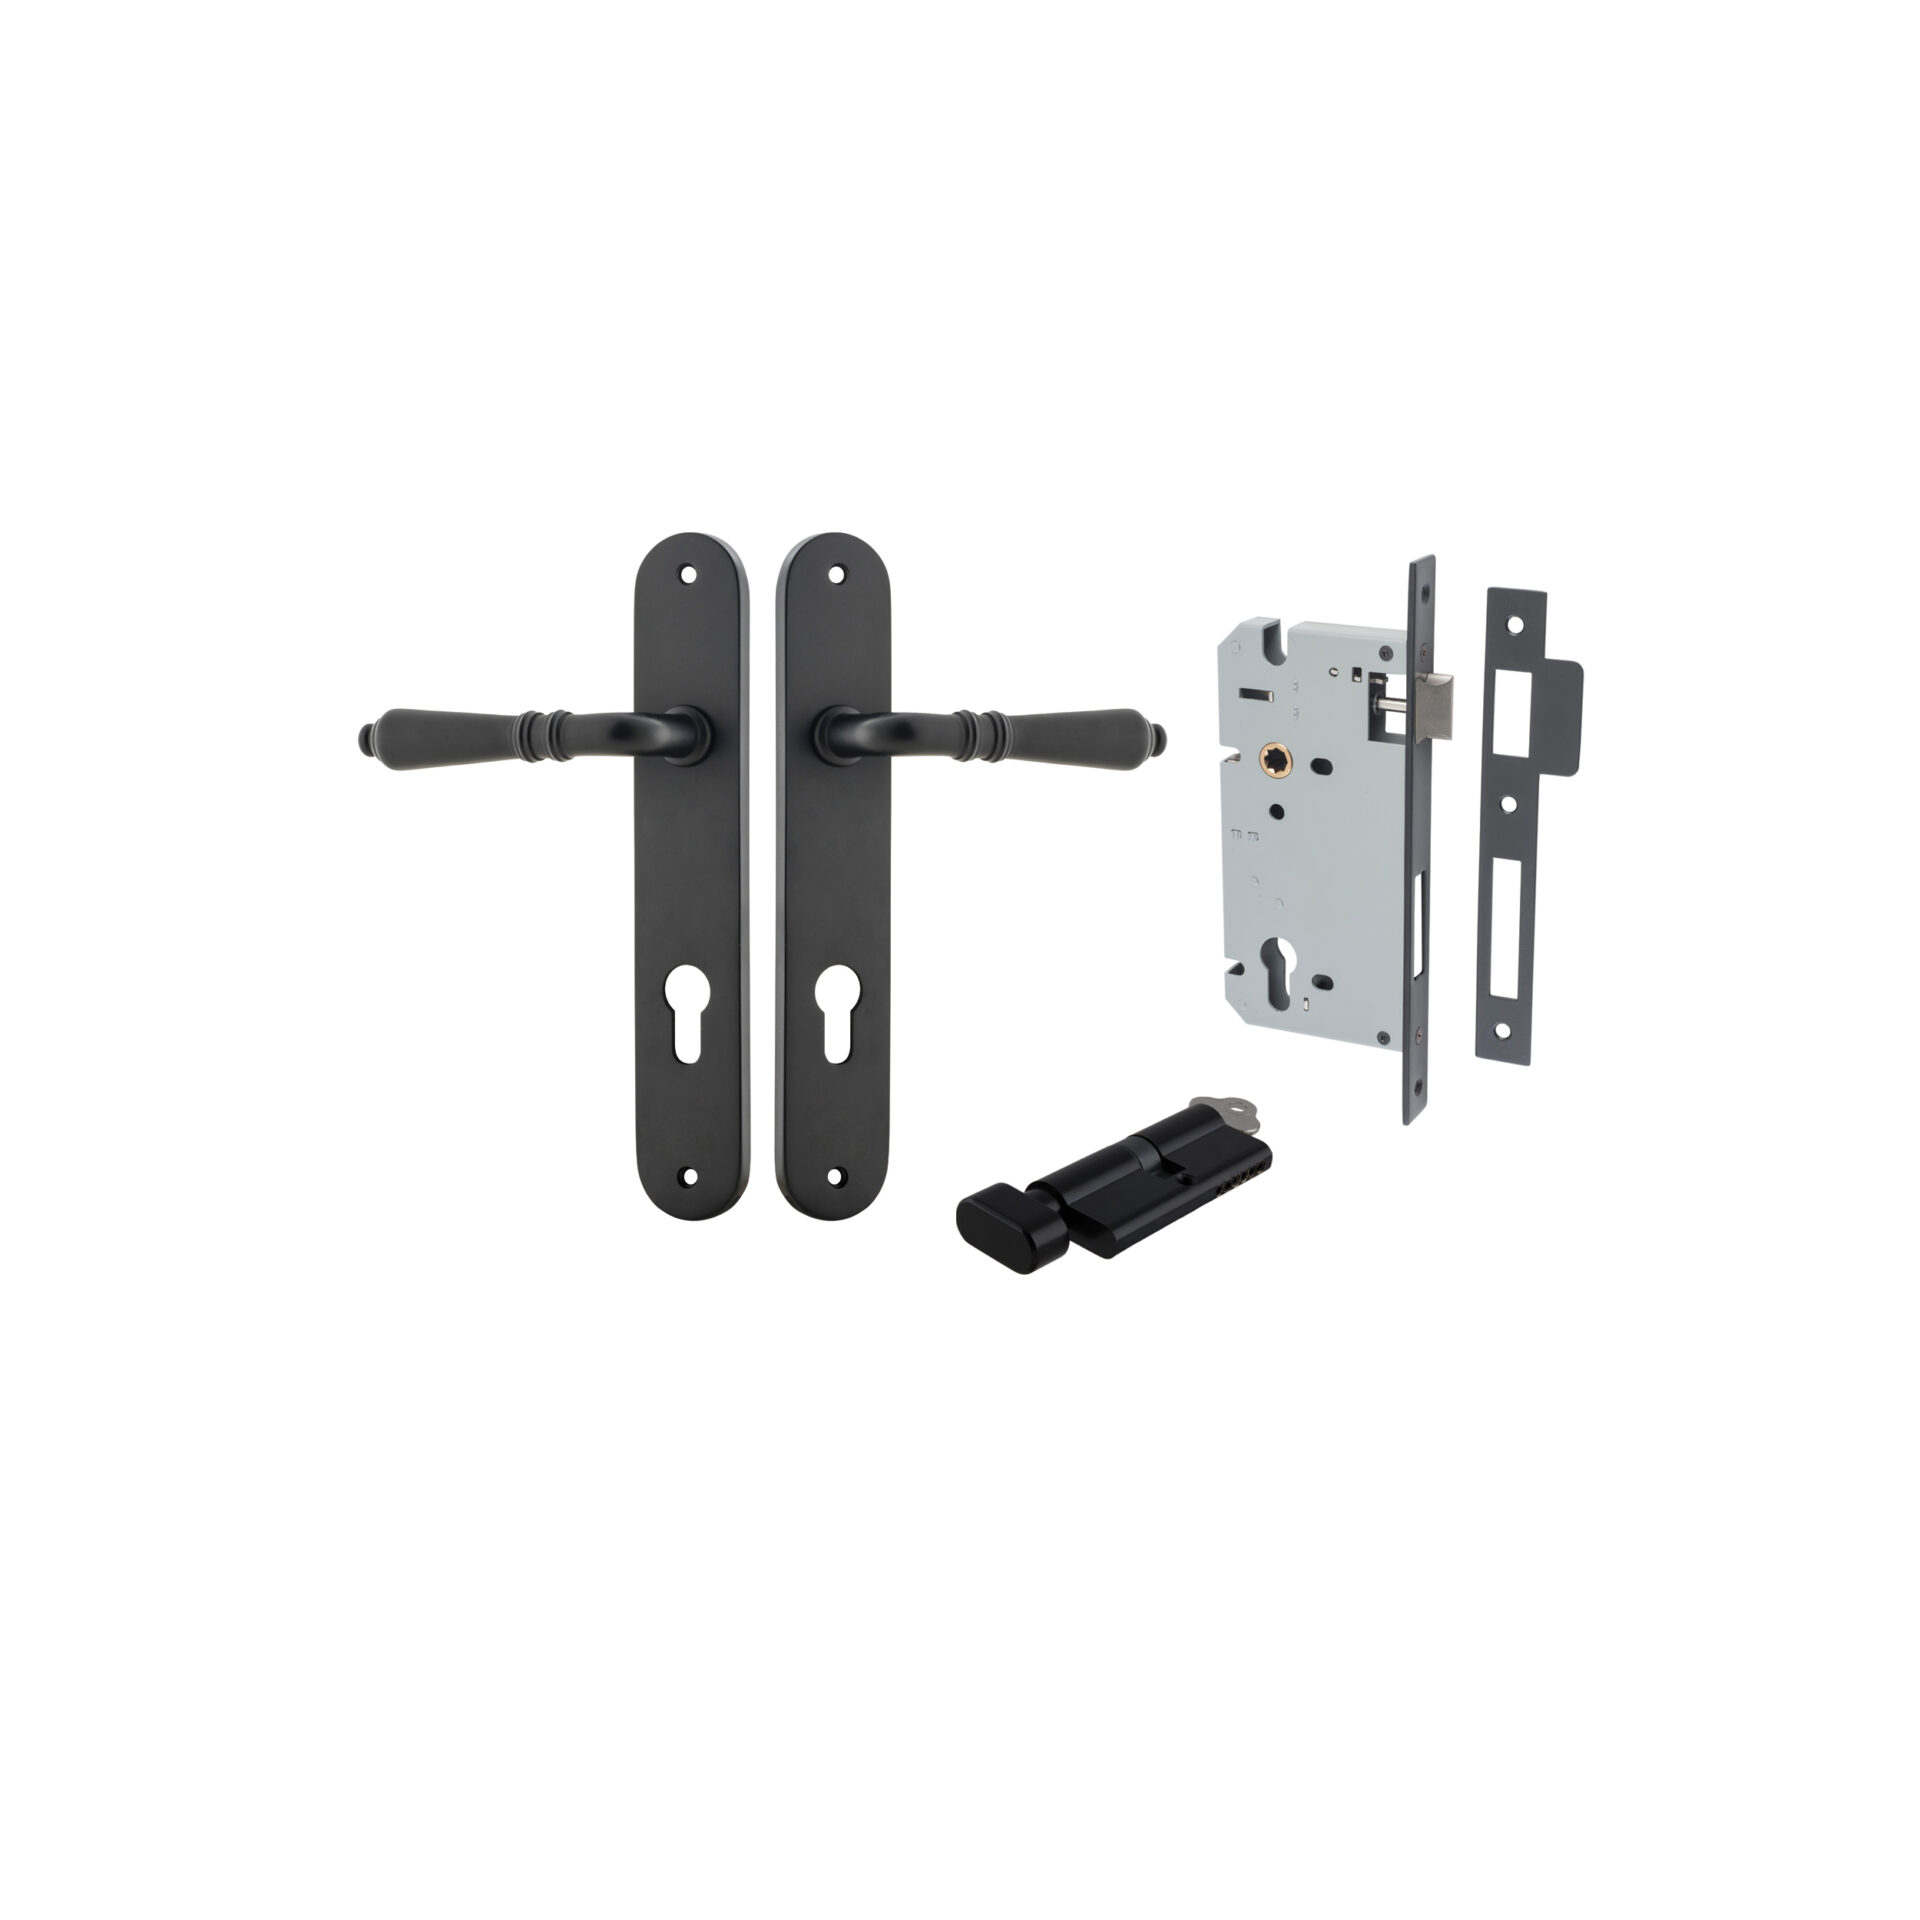 Sarlat Lever - Oval Backplate Entrance Kit with High Security Lock